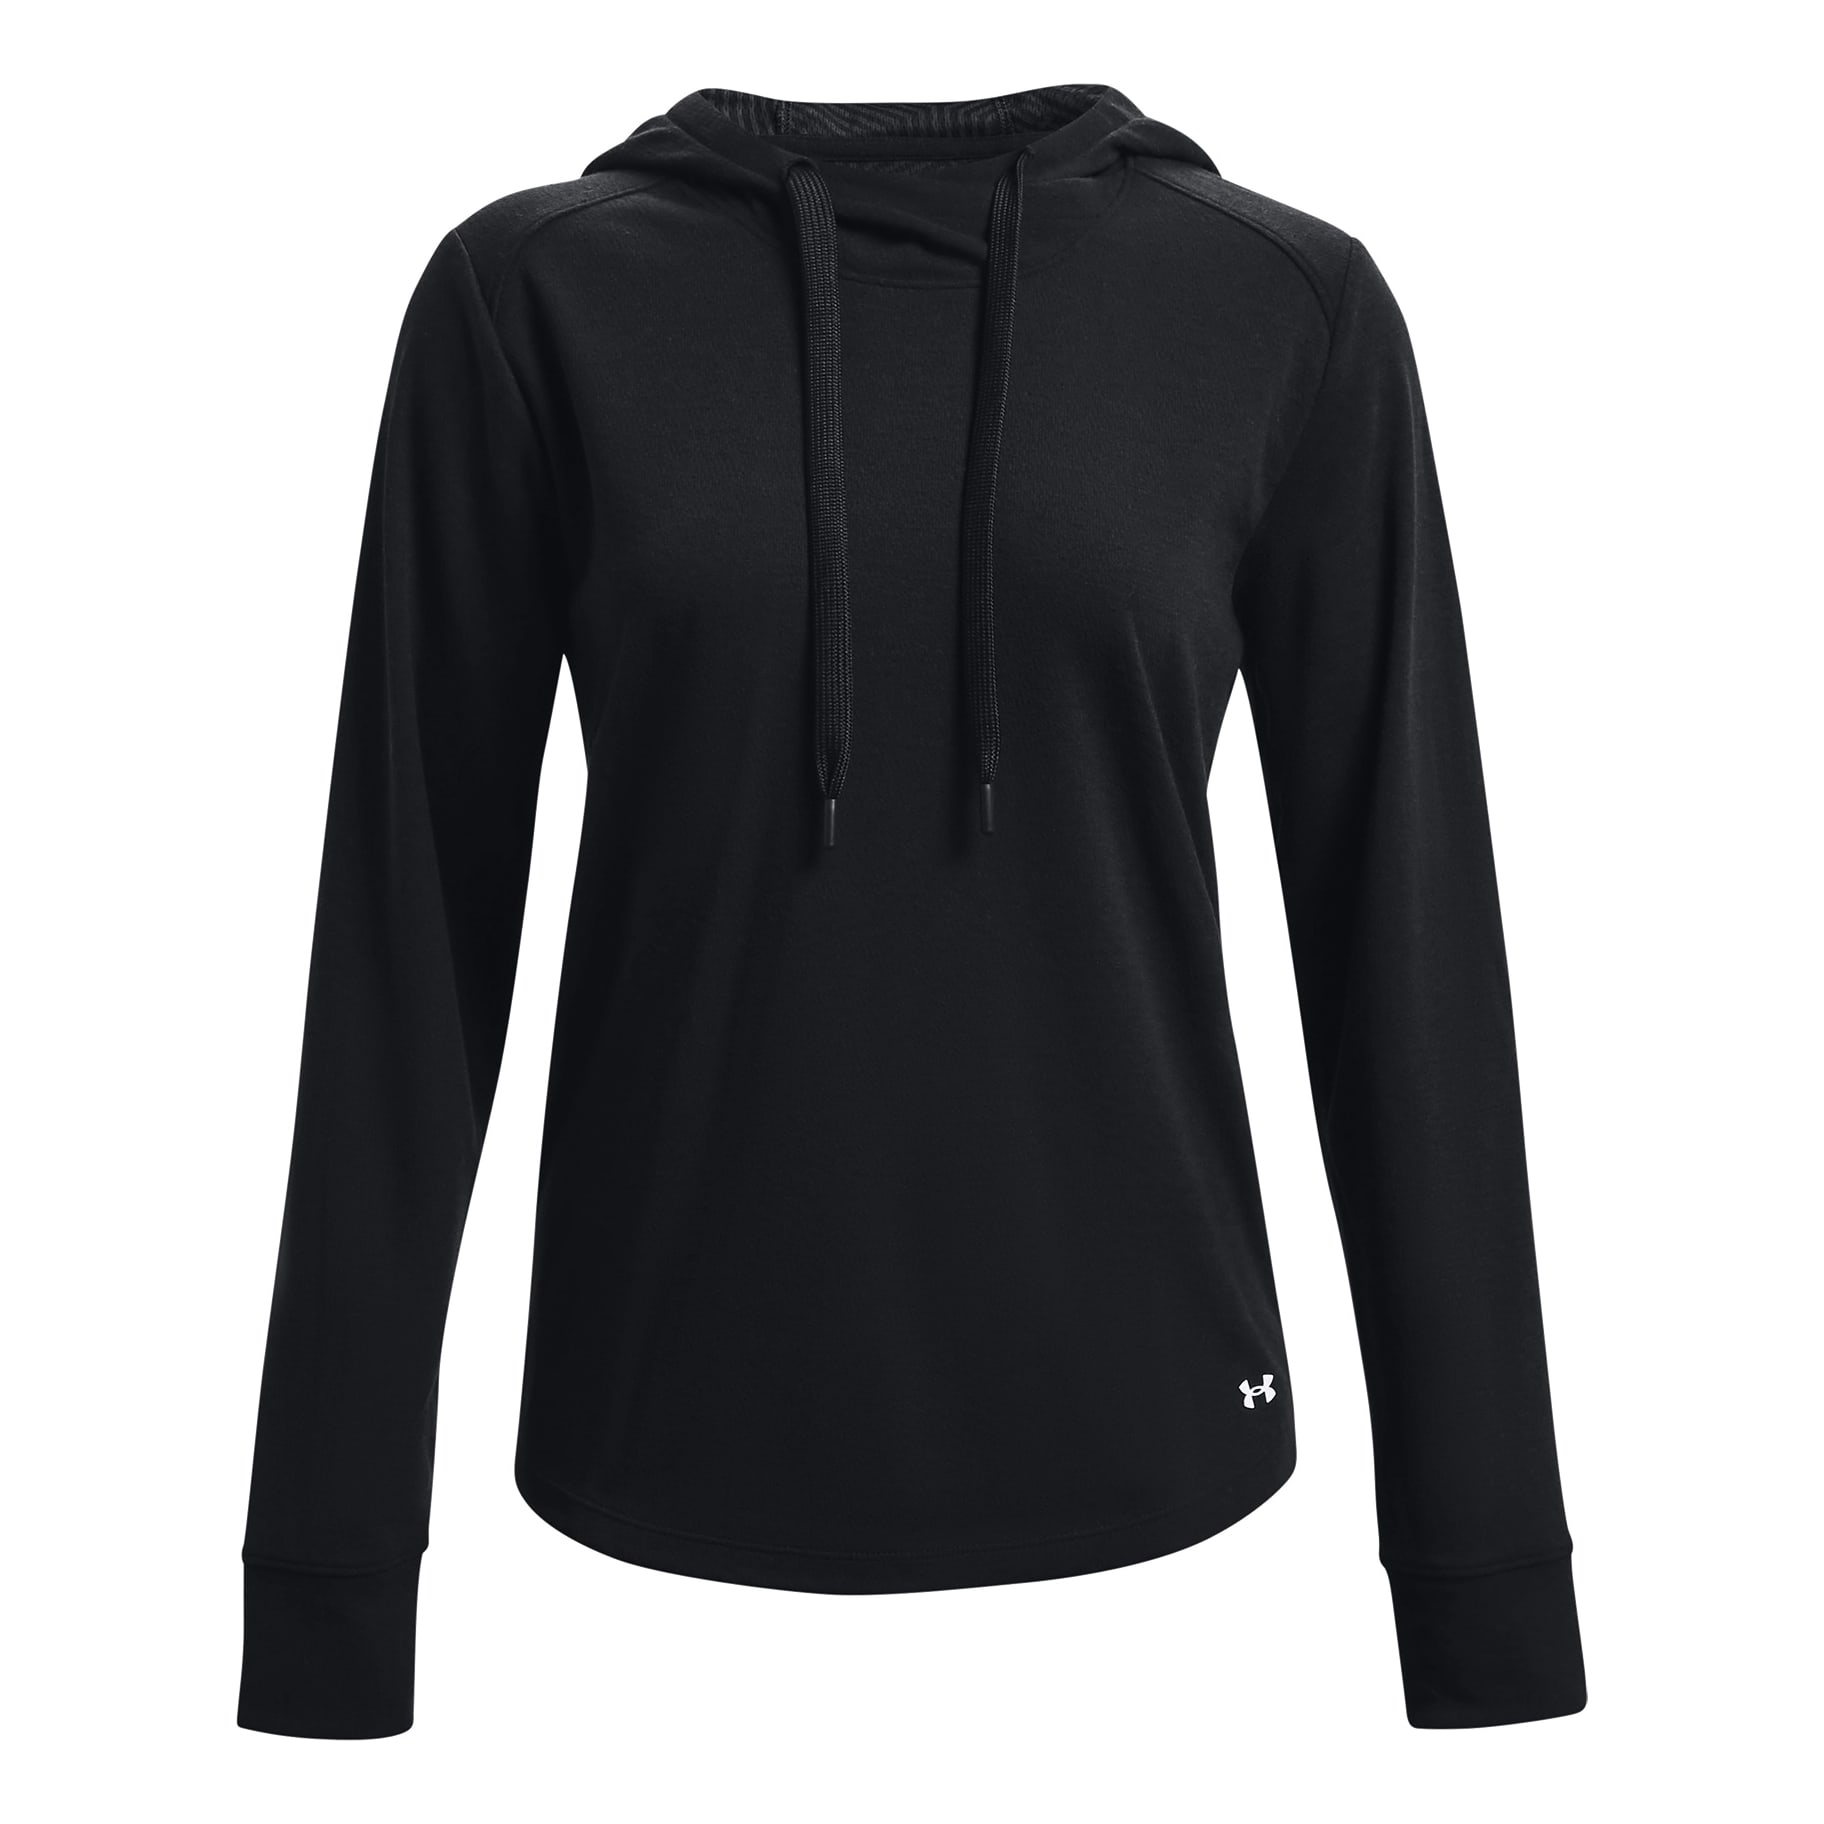 Under Armour Women's ColdGear Infrared Shield Hooded Jacket